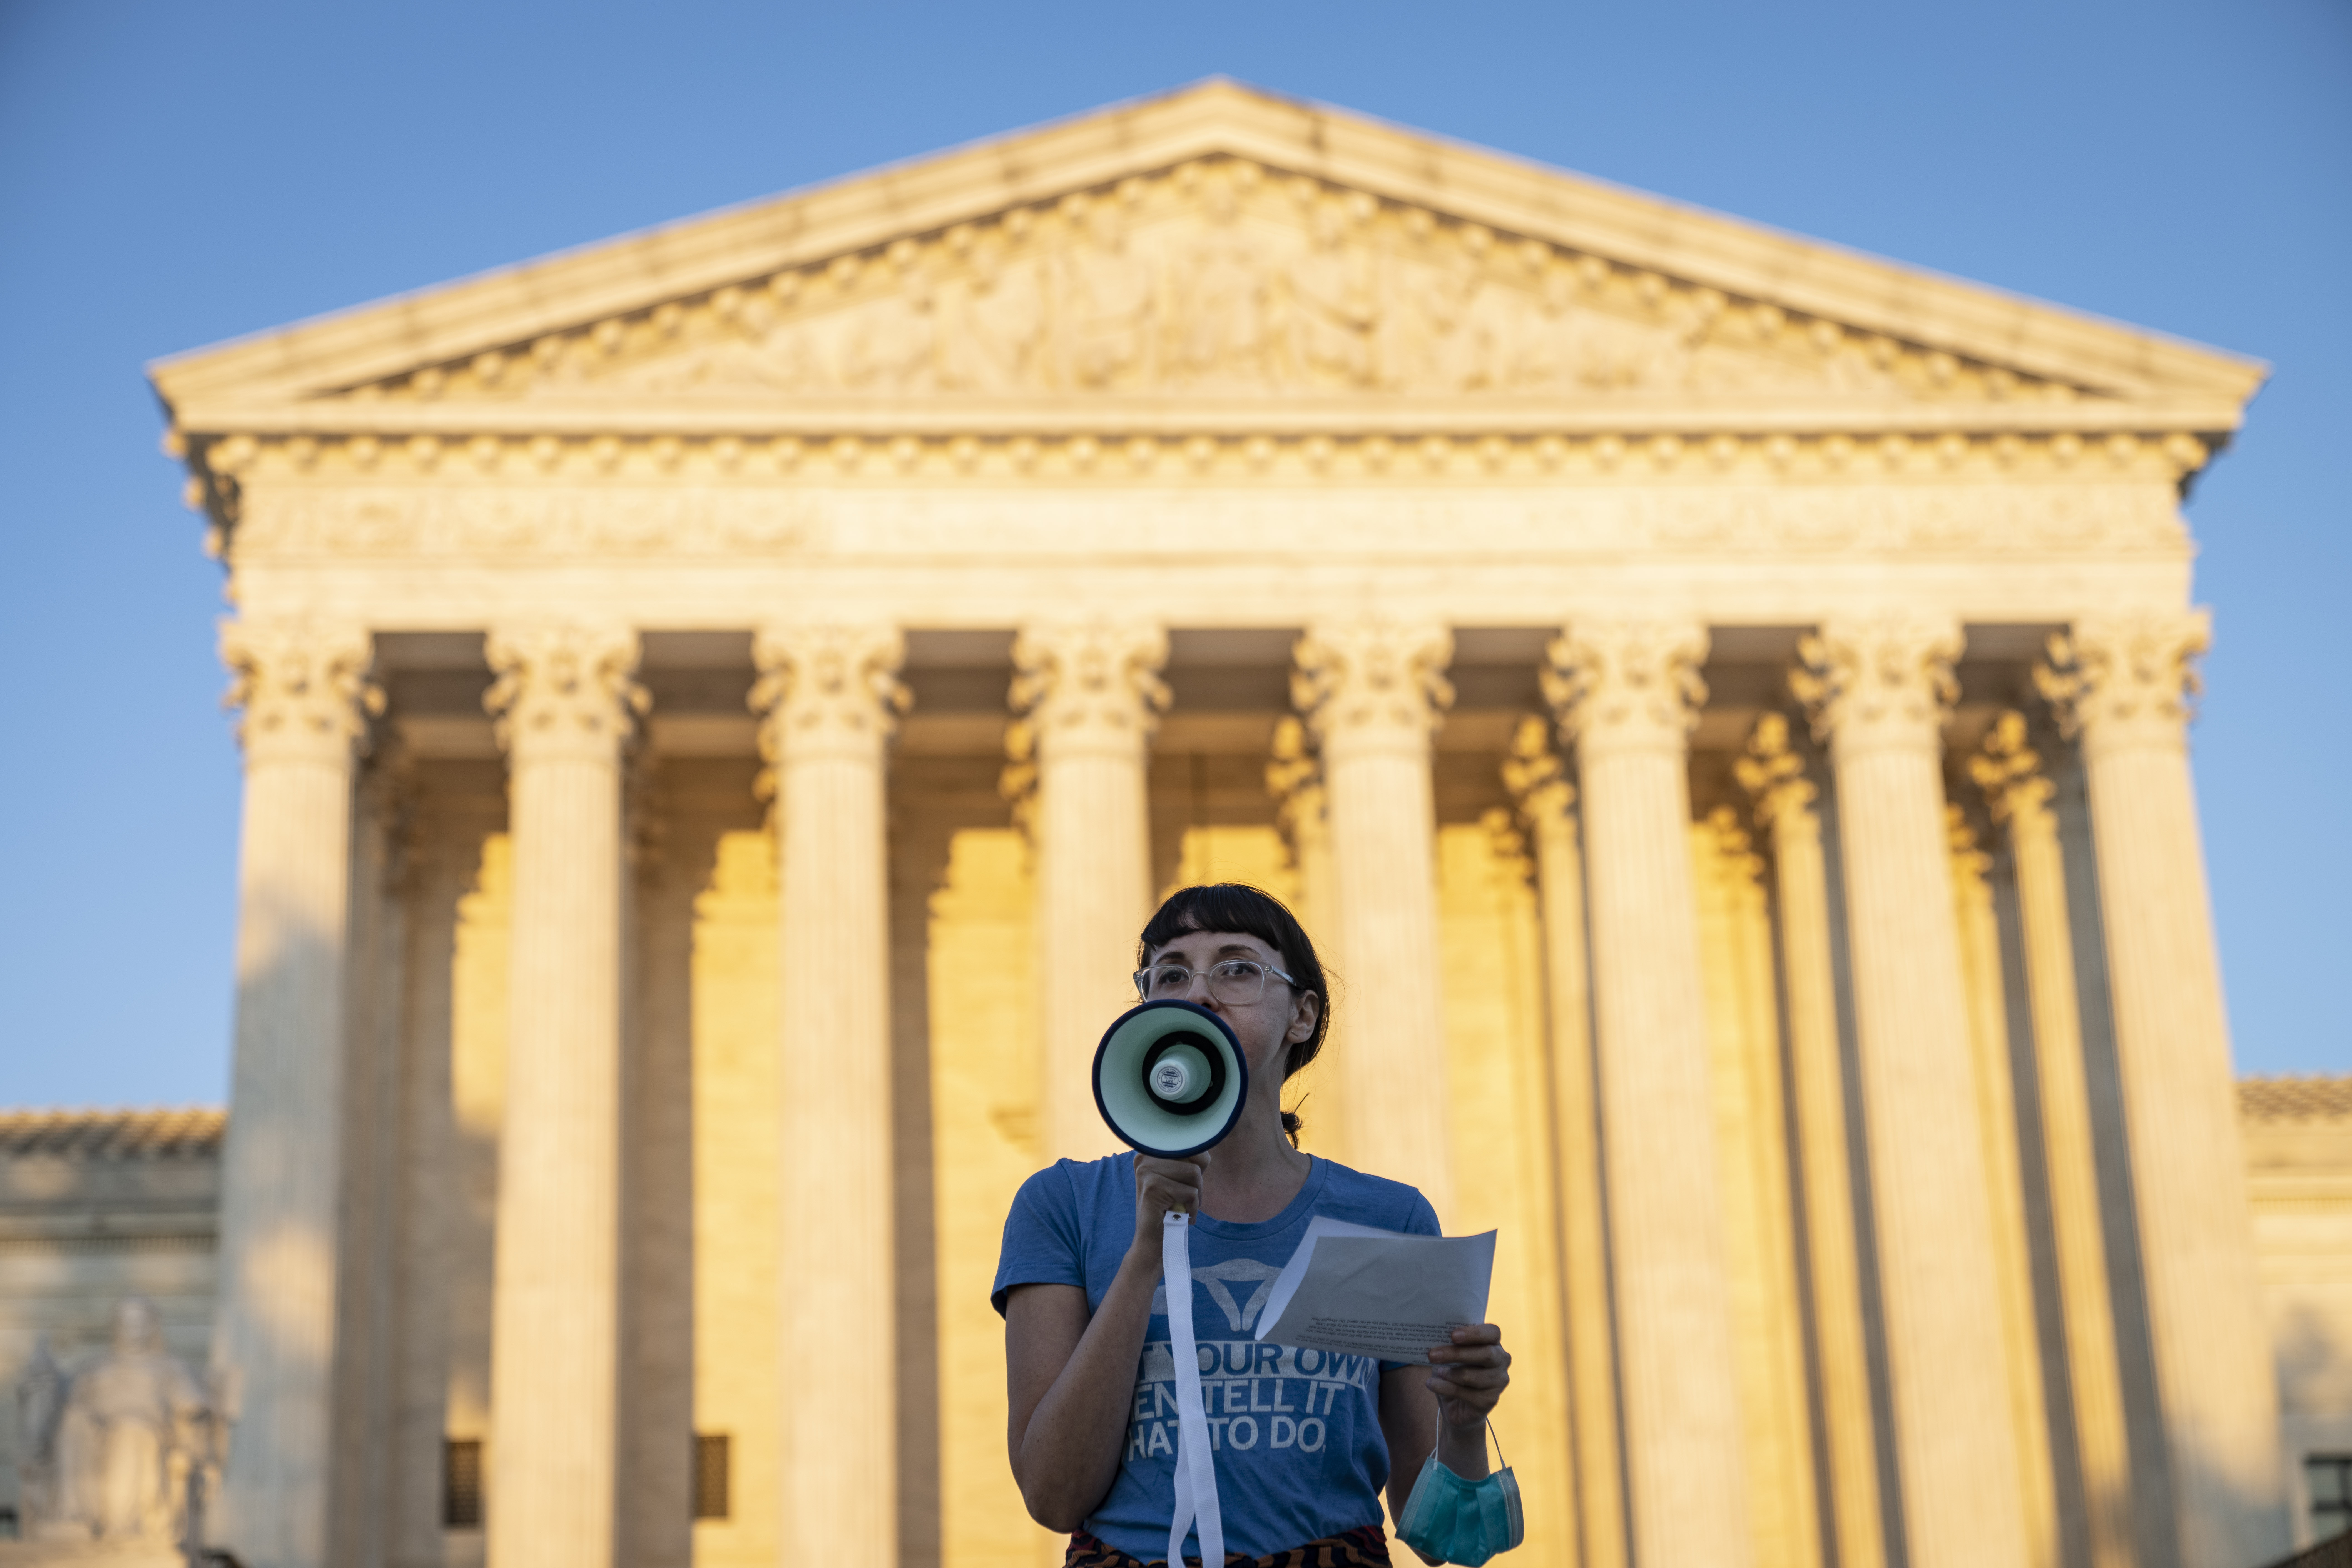 An activist protests a new Texas abortion law outside the Supreme Court. (Drew Angerer/Getty Images)